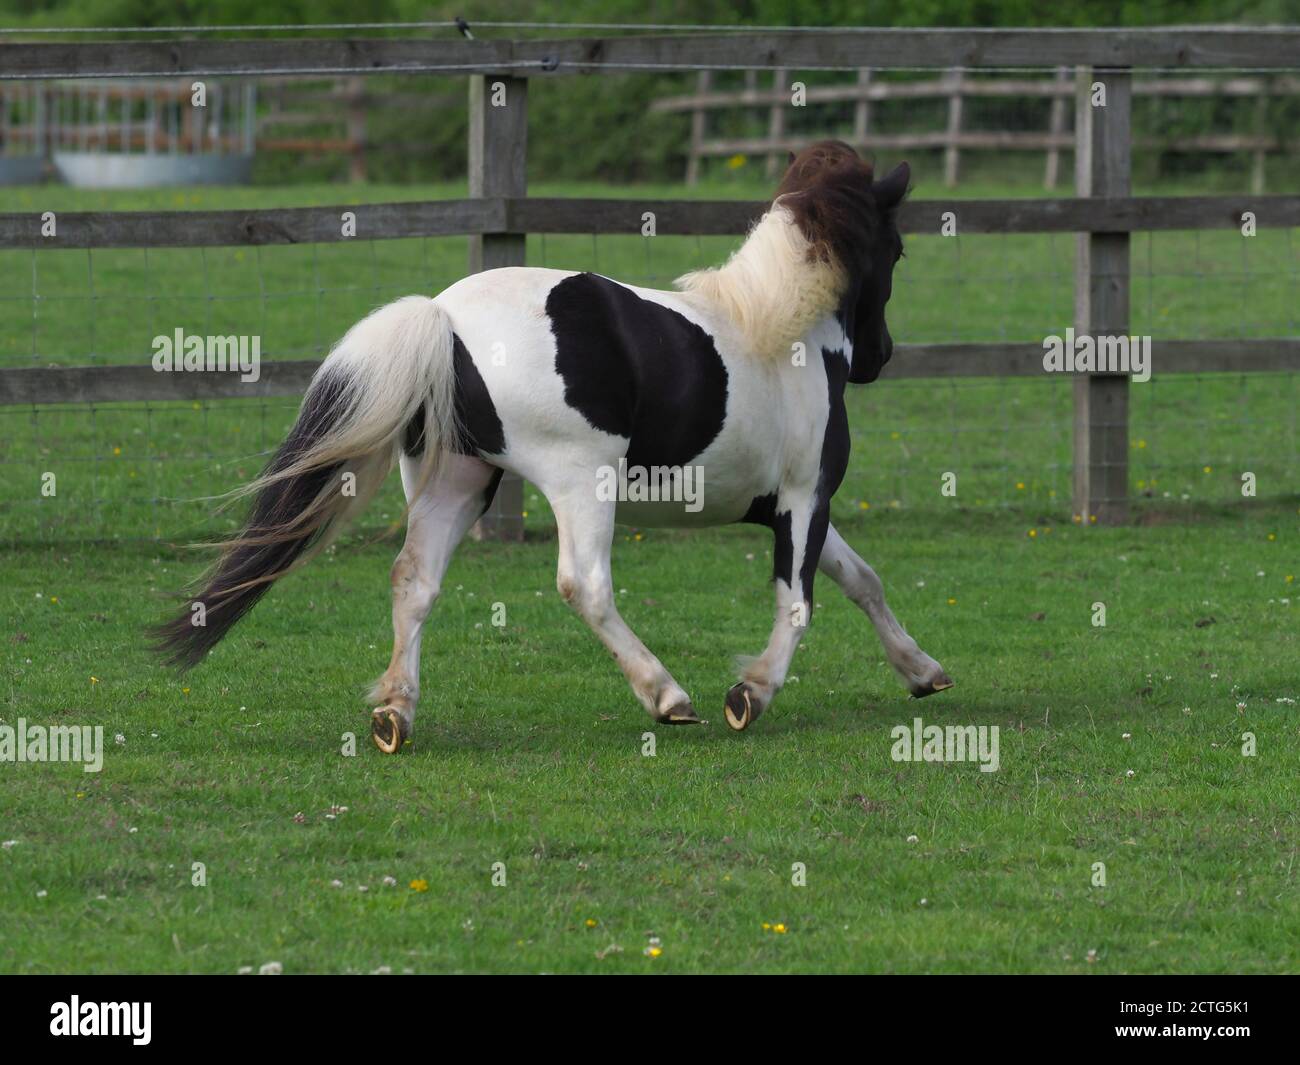 A young black and white miniature shetland pony plays in a paddock. Stock Photo